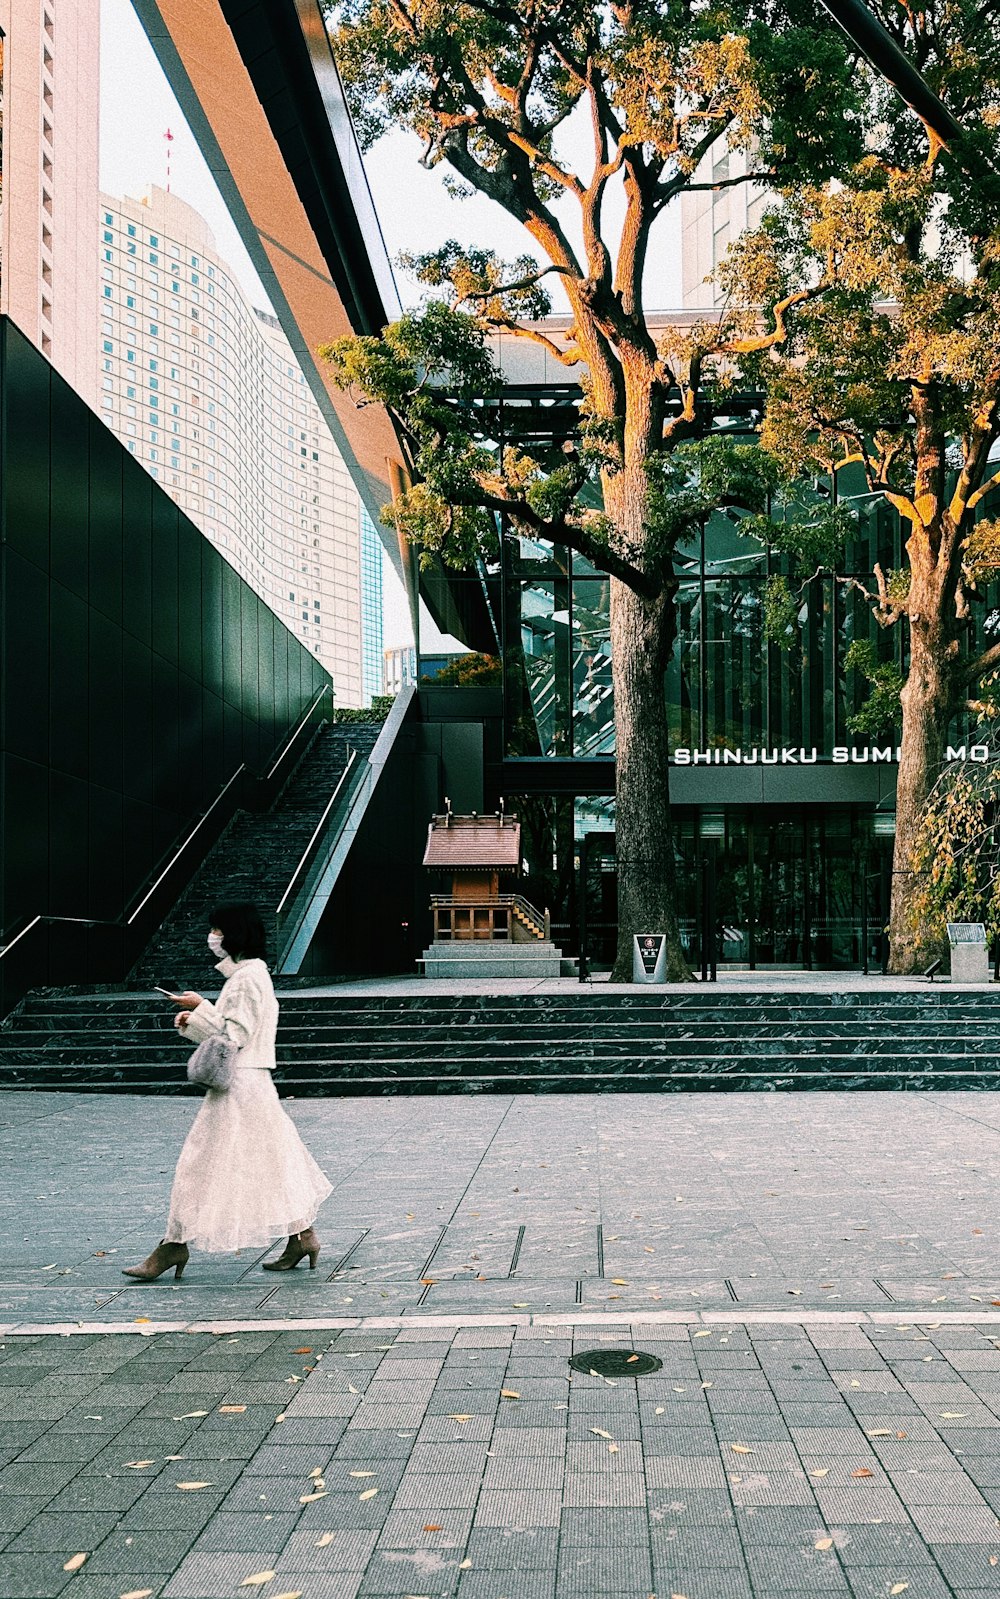 a woman in a white dress is walking down the street